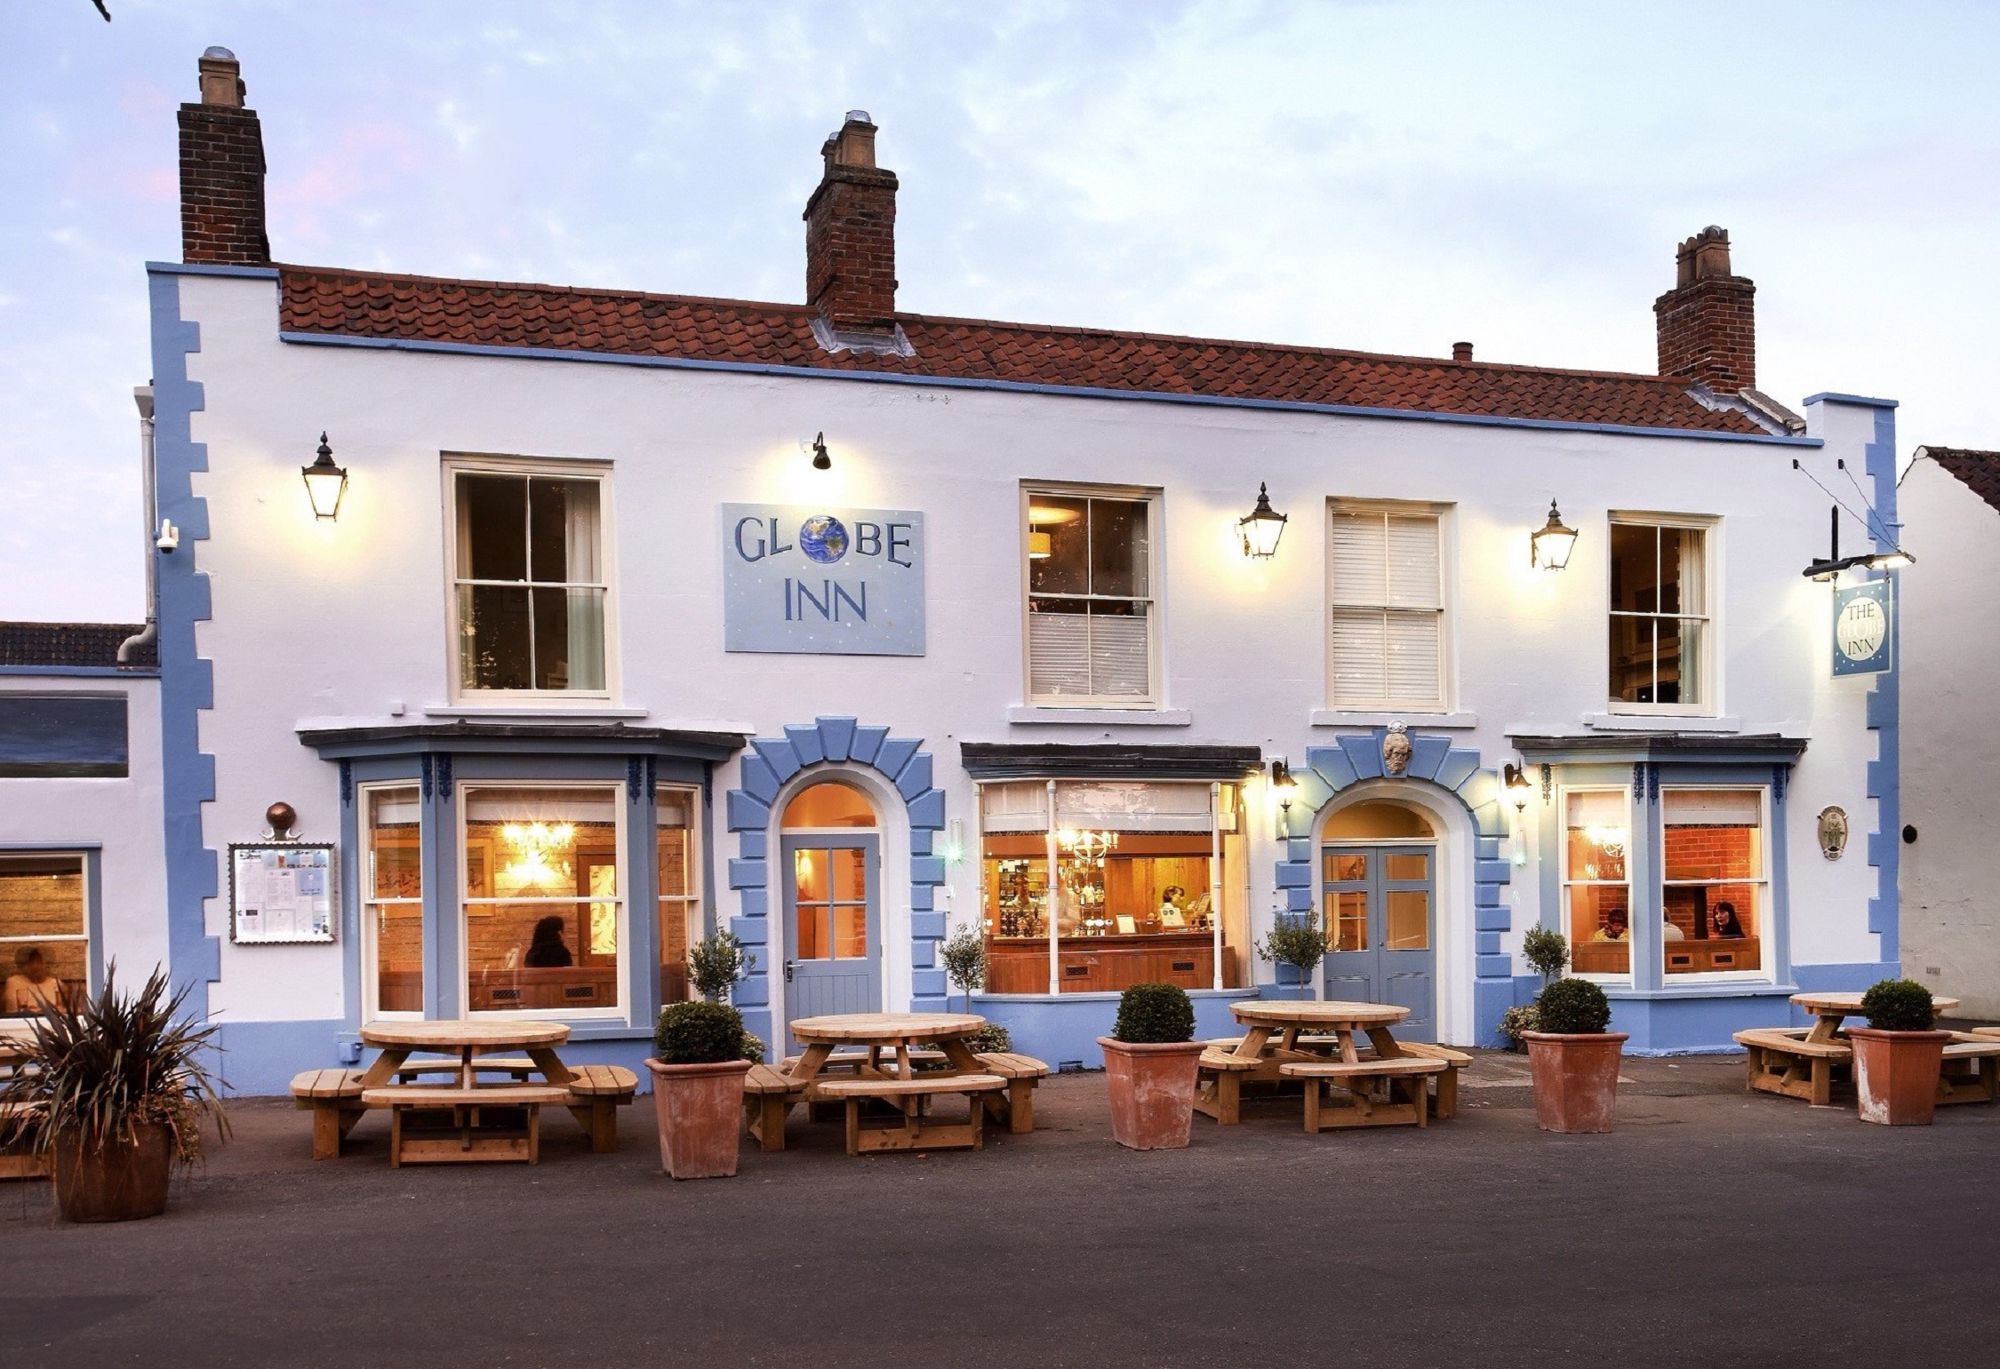 Hotels in East Anglia holidays at Cool Places